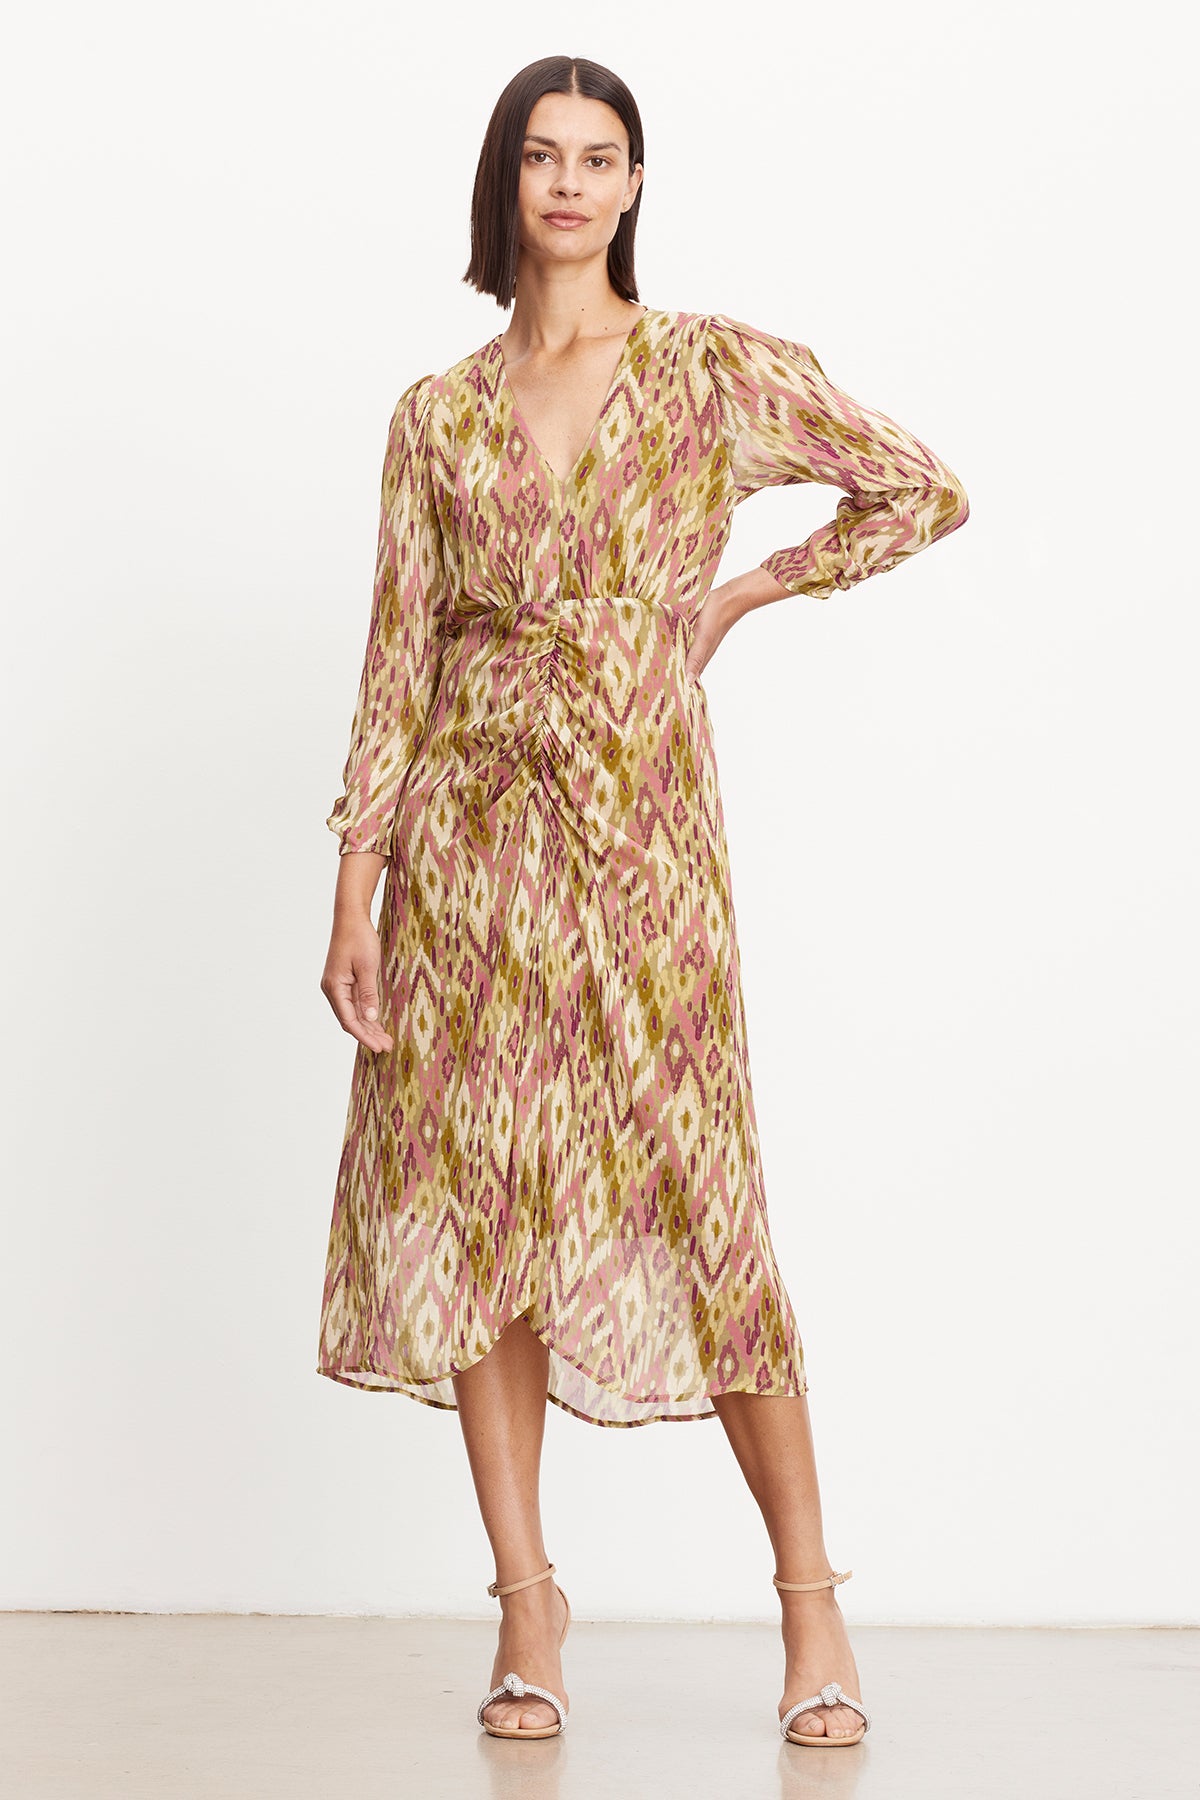 The chic model is wearing a CAILEY PRINTED RUCHED DRESS by Velvet by Graham & Spencer that has a flattering fit and features a v-neckline.-35577738330305